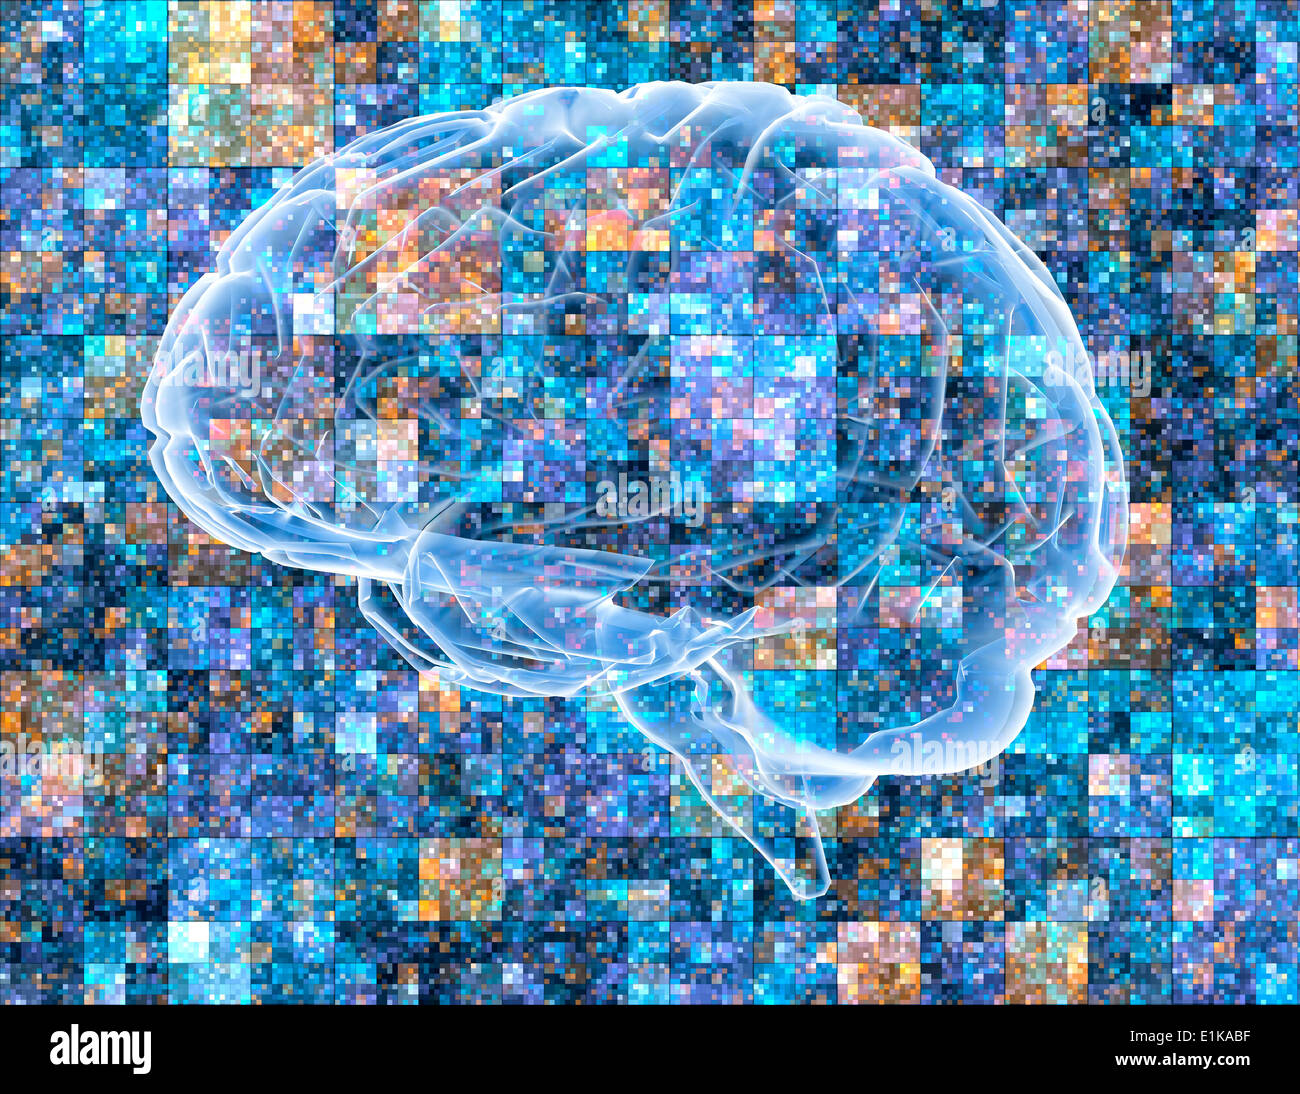 Conceptual computer artwork of a brain over a pixelated background This could represent Alzheimer's disease confusion condition Stock Photo